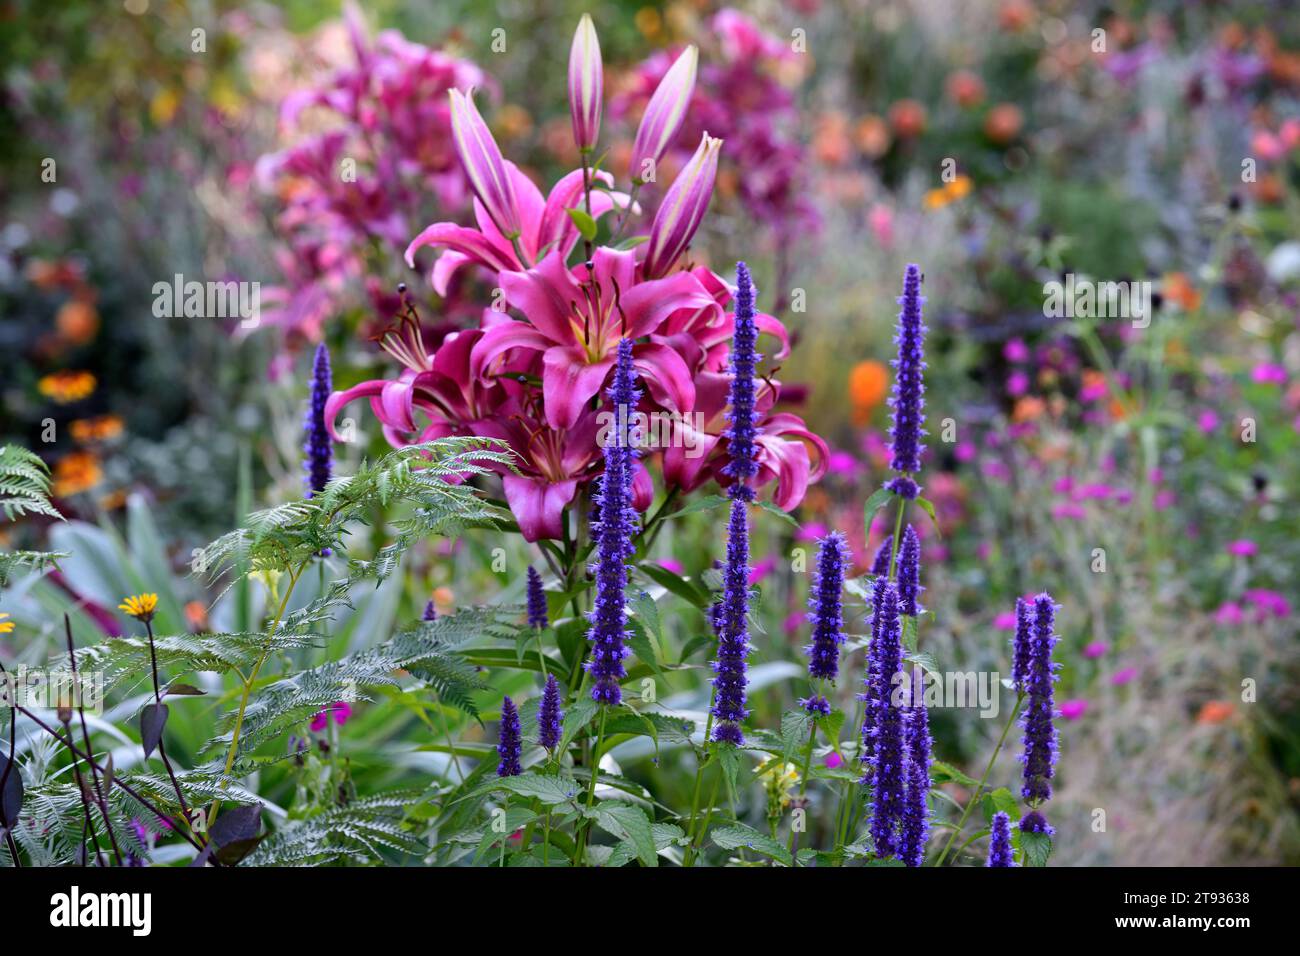 agastache black adder, lilium purple prince,agastache and lily,lilies,mixed planting scheme,mixed border,perennial planting,deep blue and pink flowers Stock Photo